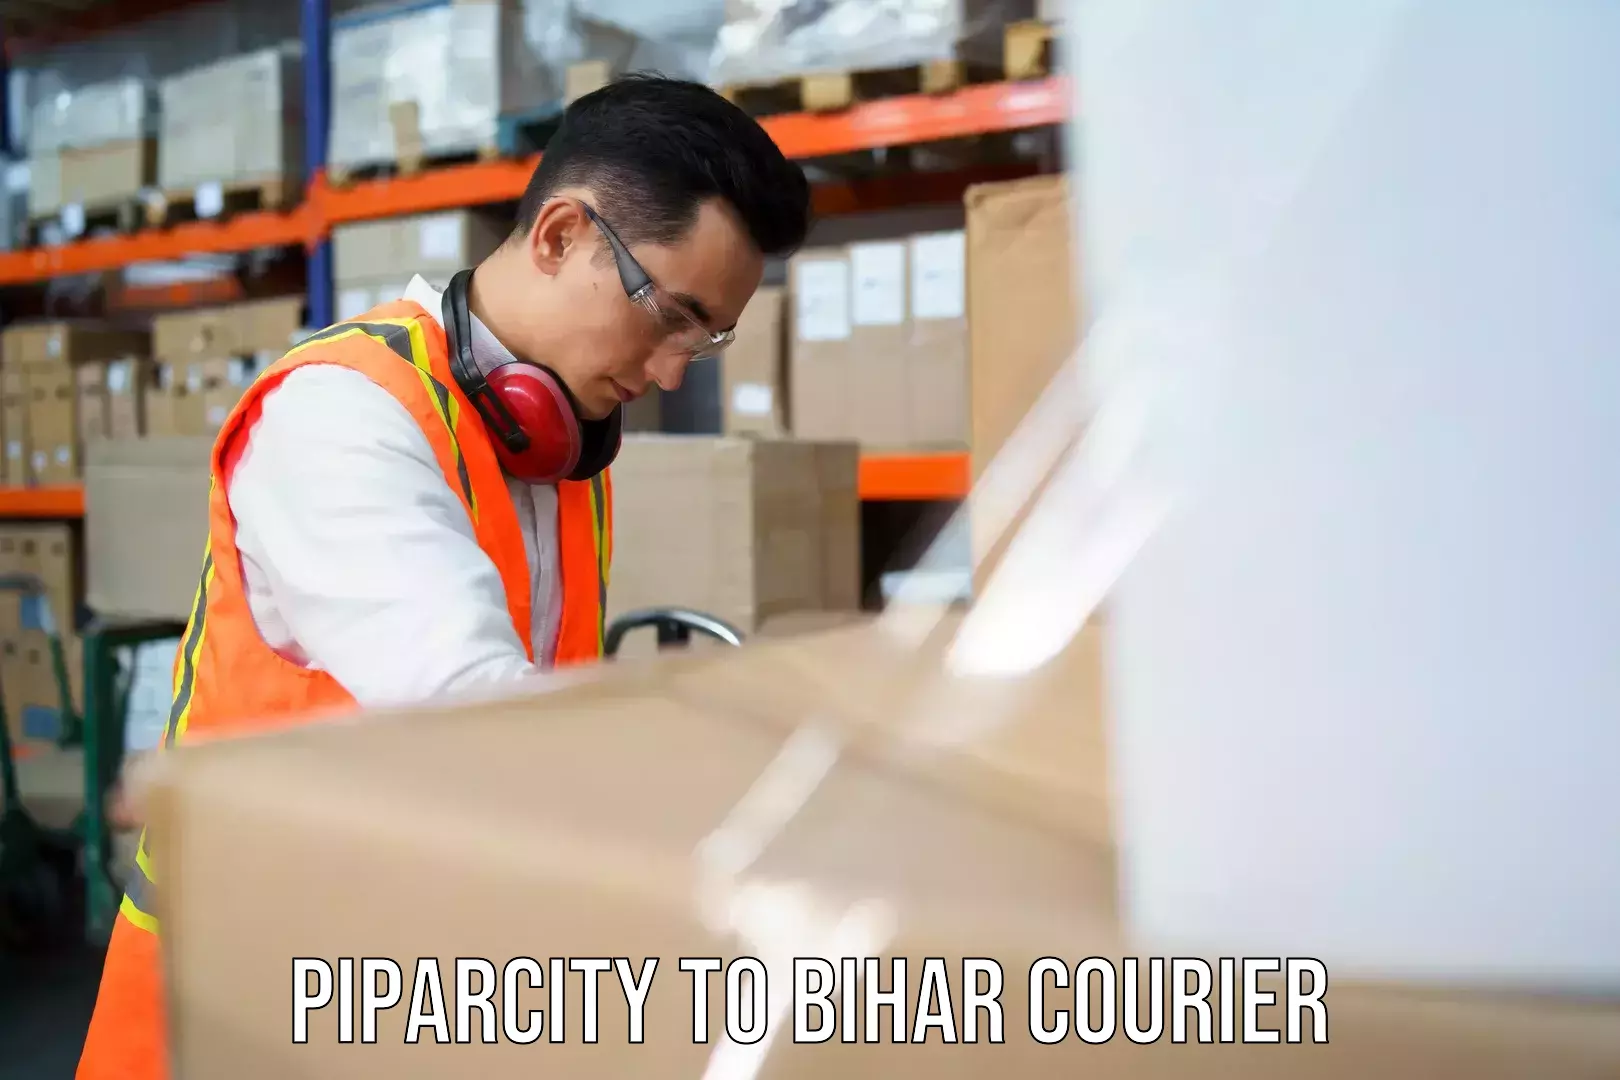 Express logistics providers Piparcity to Bihar